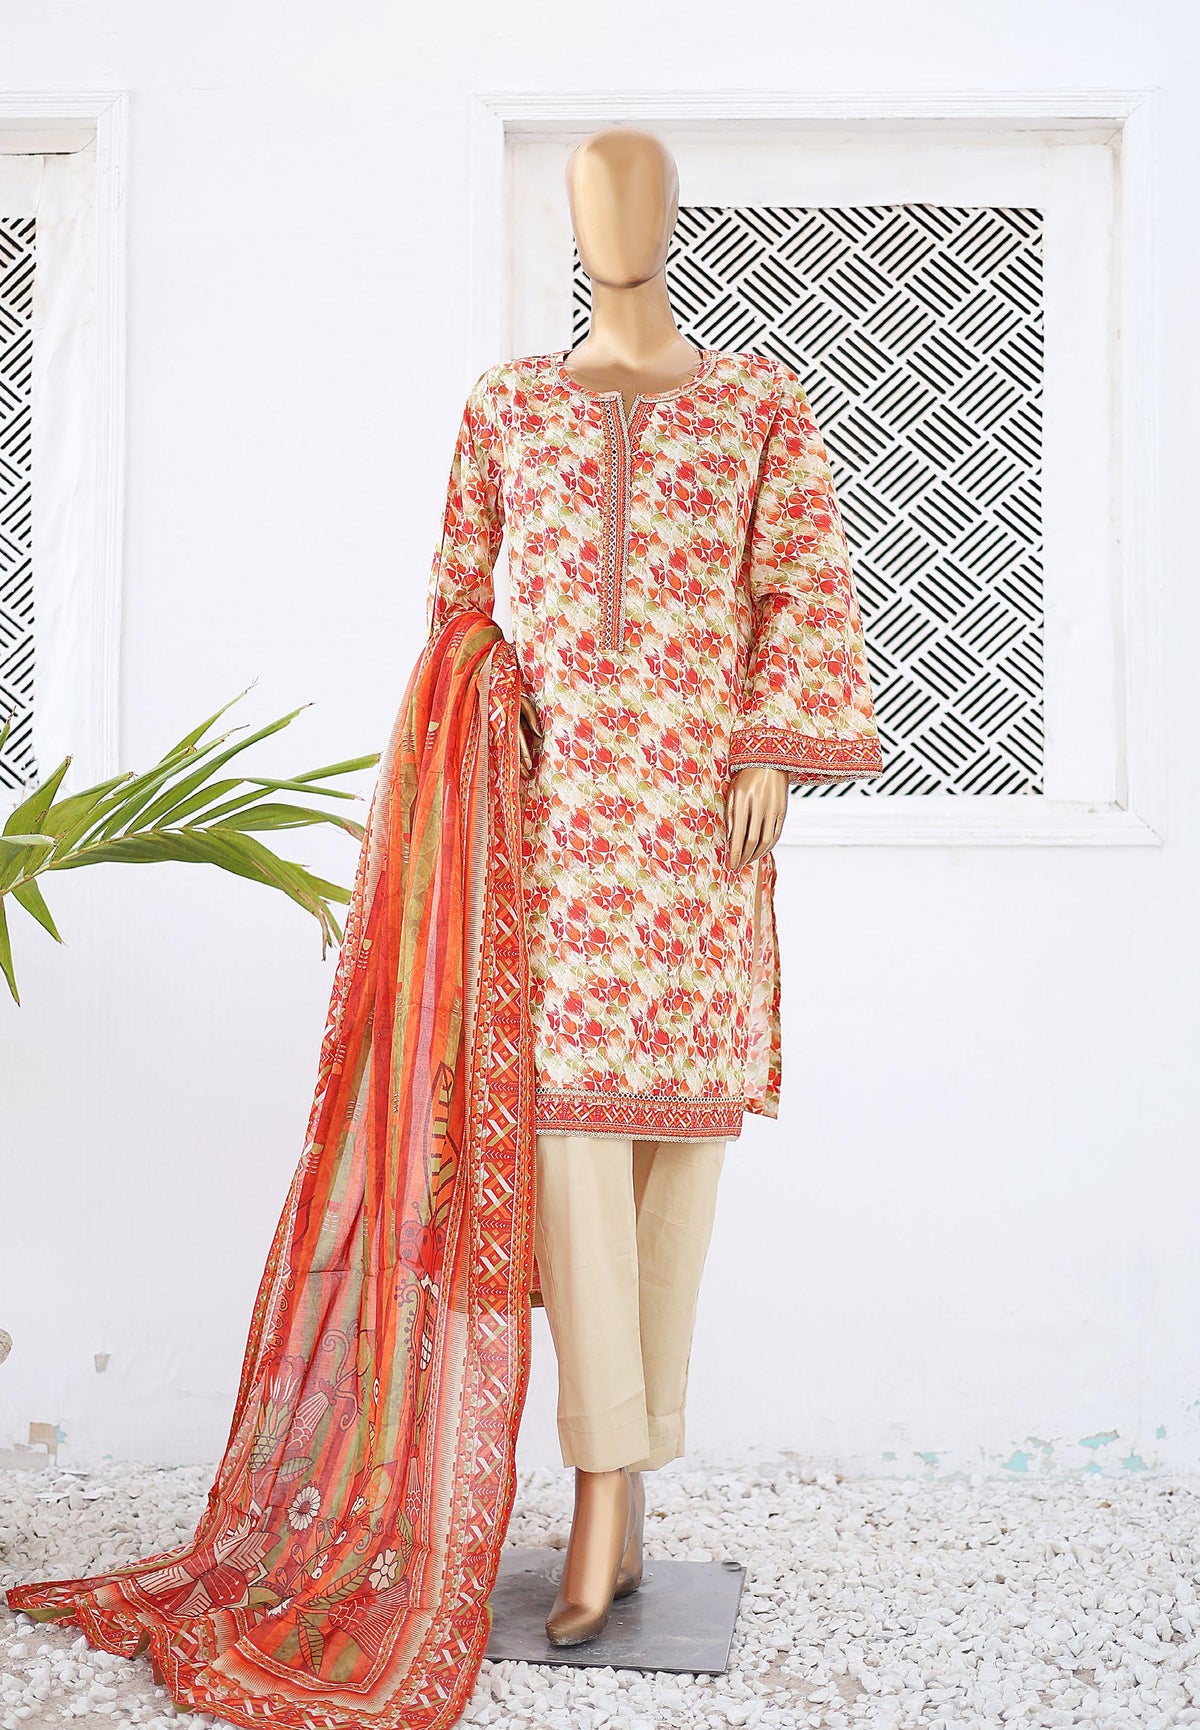 Bin Saeed Printed Lawn Coll"24-3Piece Stitched D-11